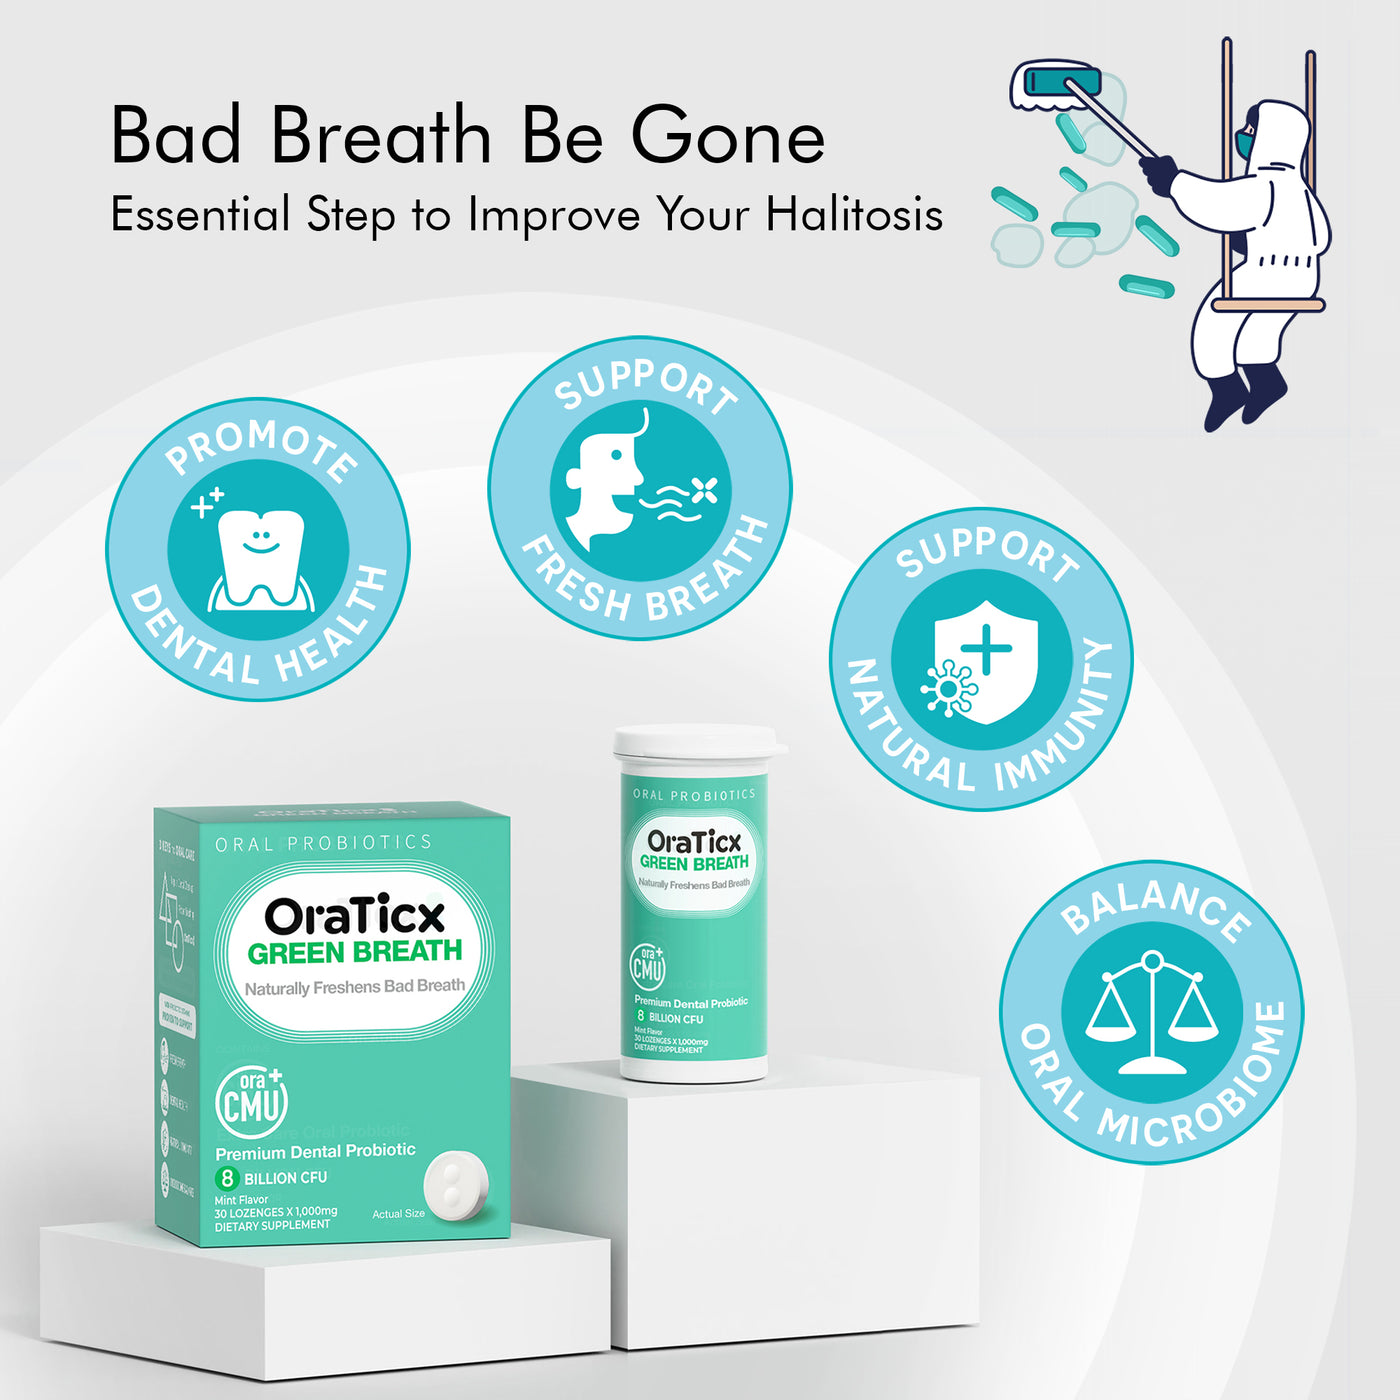 Unlock the power of OraTicx oral probiotics - Say goodbye to bad breath by tackling the root causes head-on! End bad breath now with OraTicx Green Breath- just one simple stop!